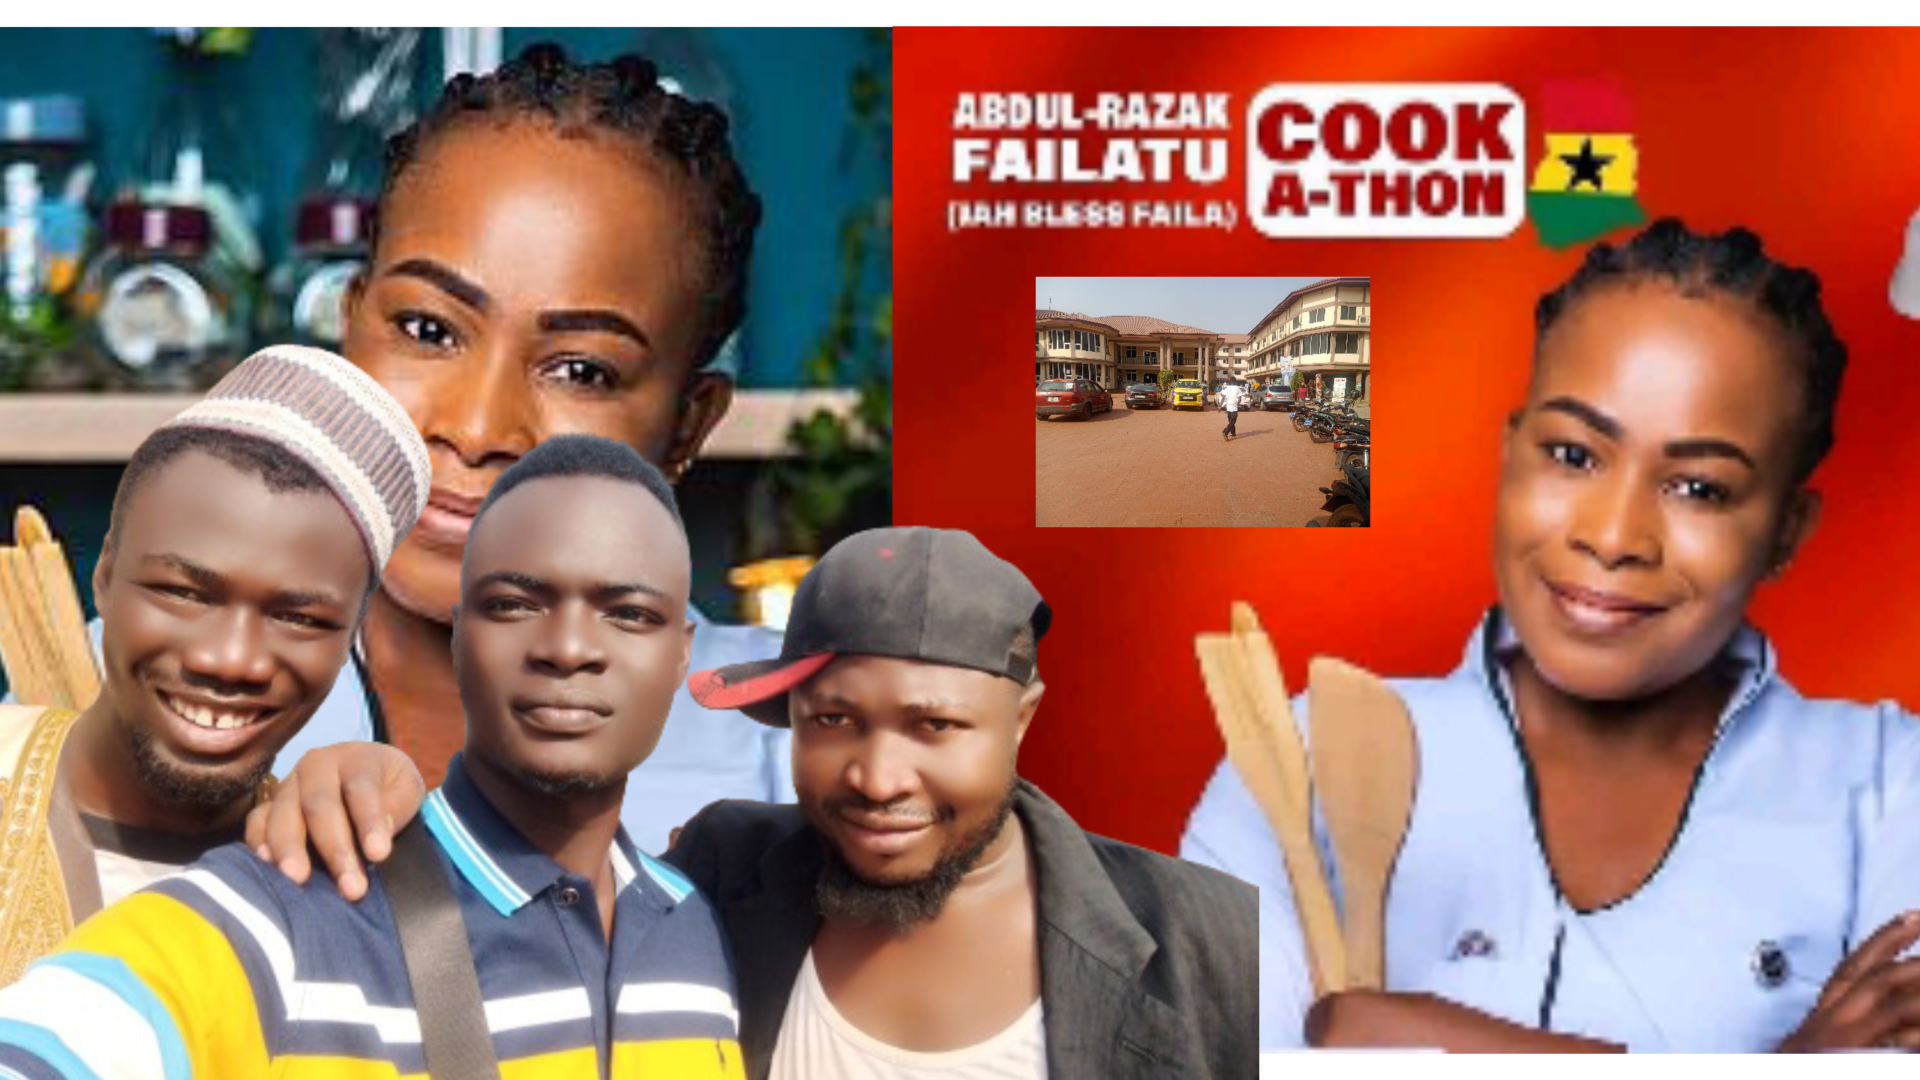 How I Left Bolga for Tamale to Witness the Cook-A-Thon by Faila (Guinness Book of Records)